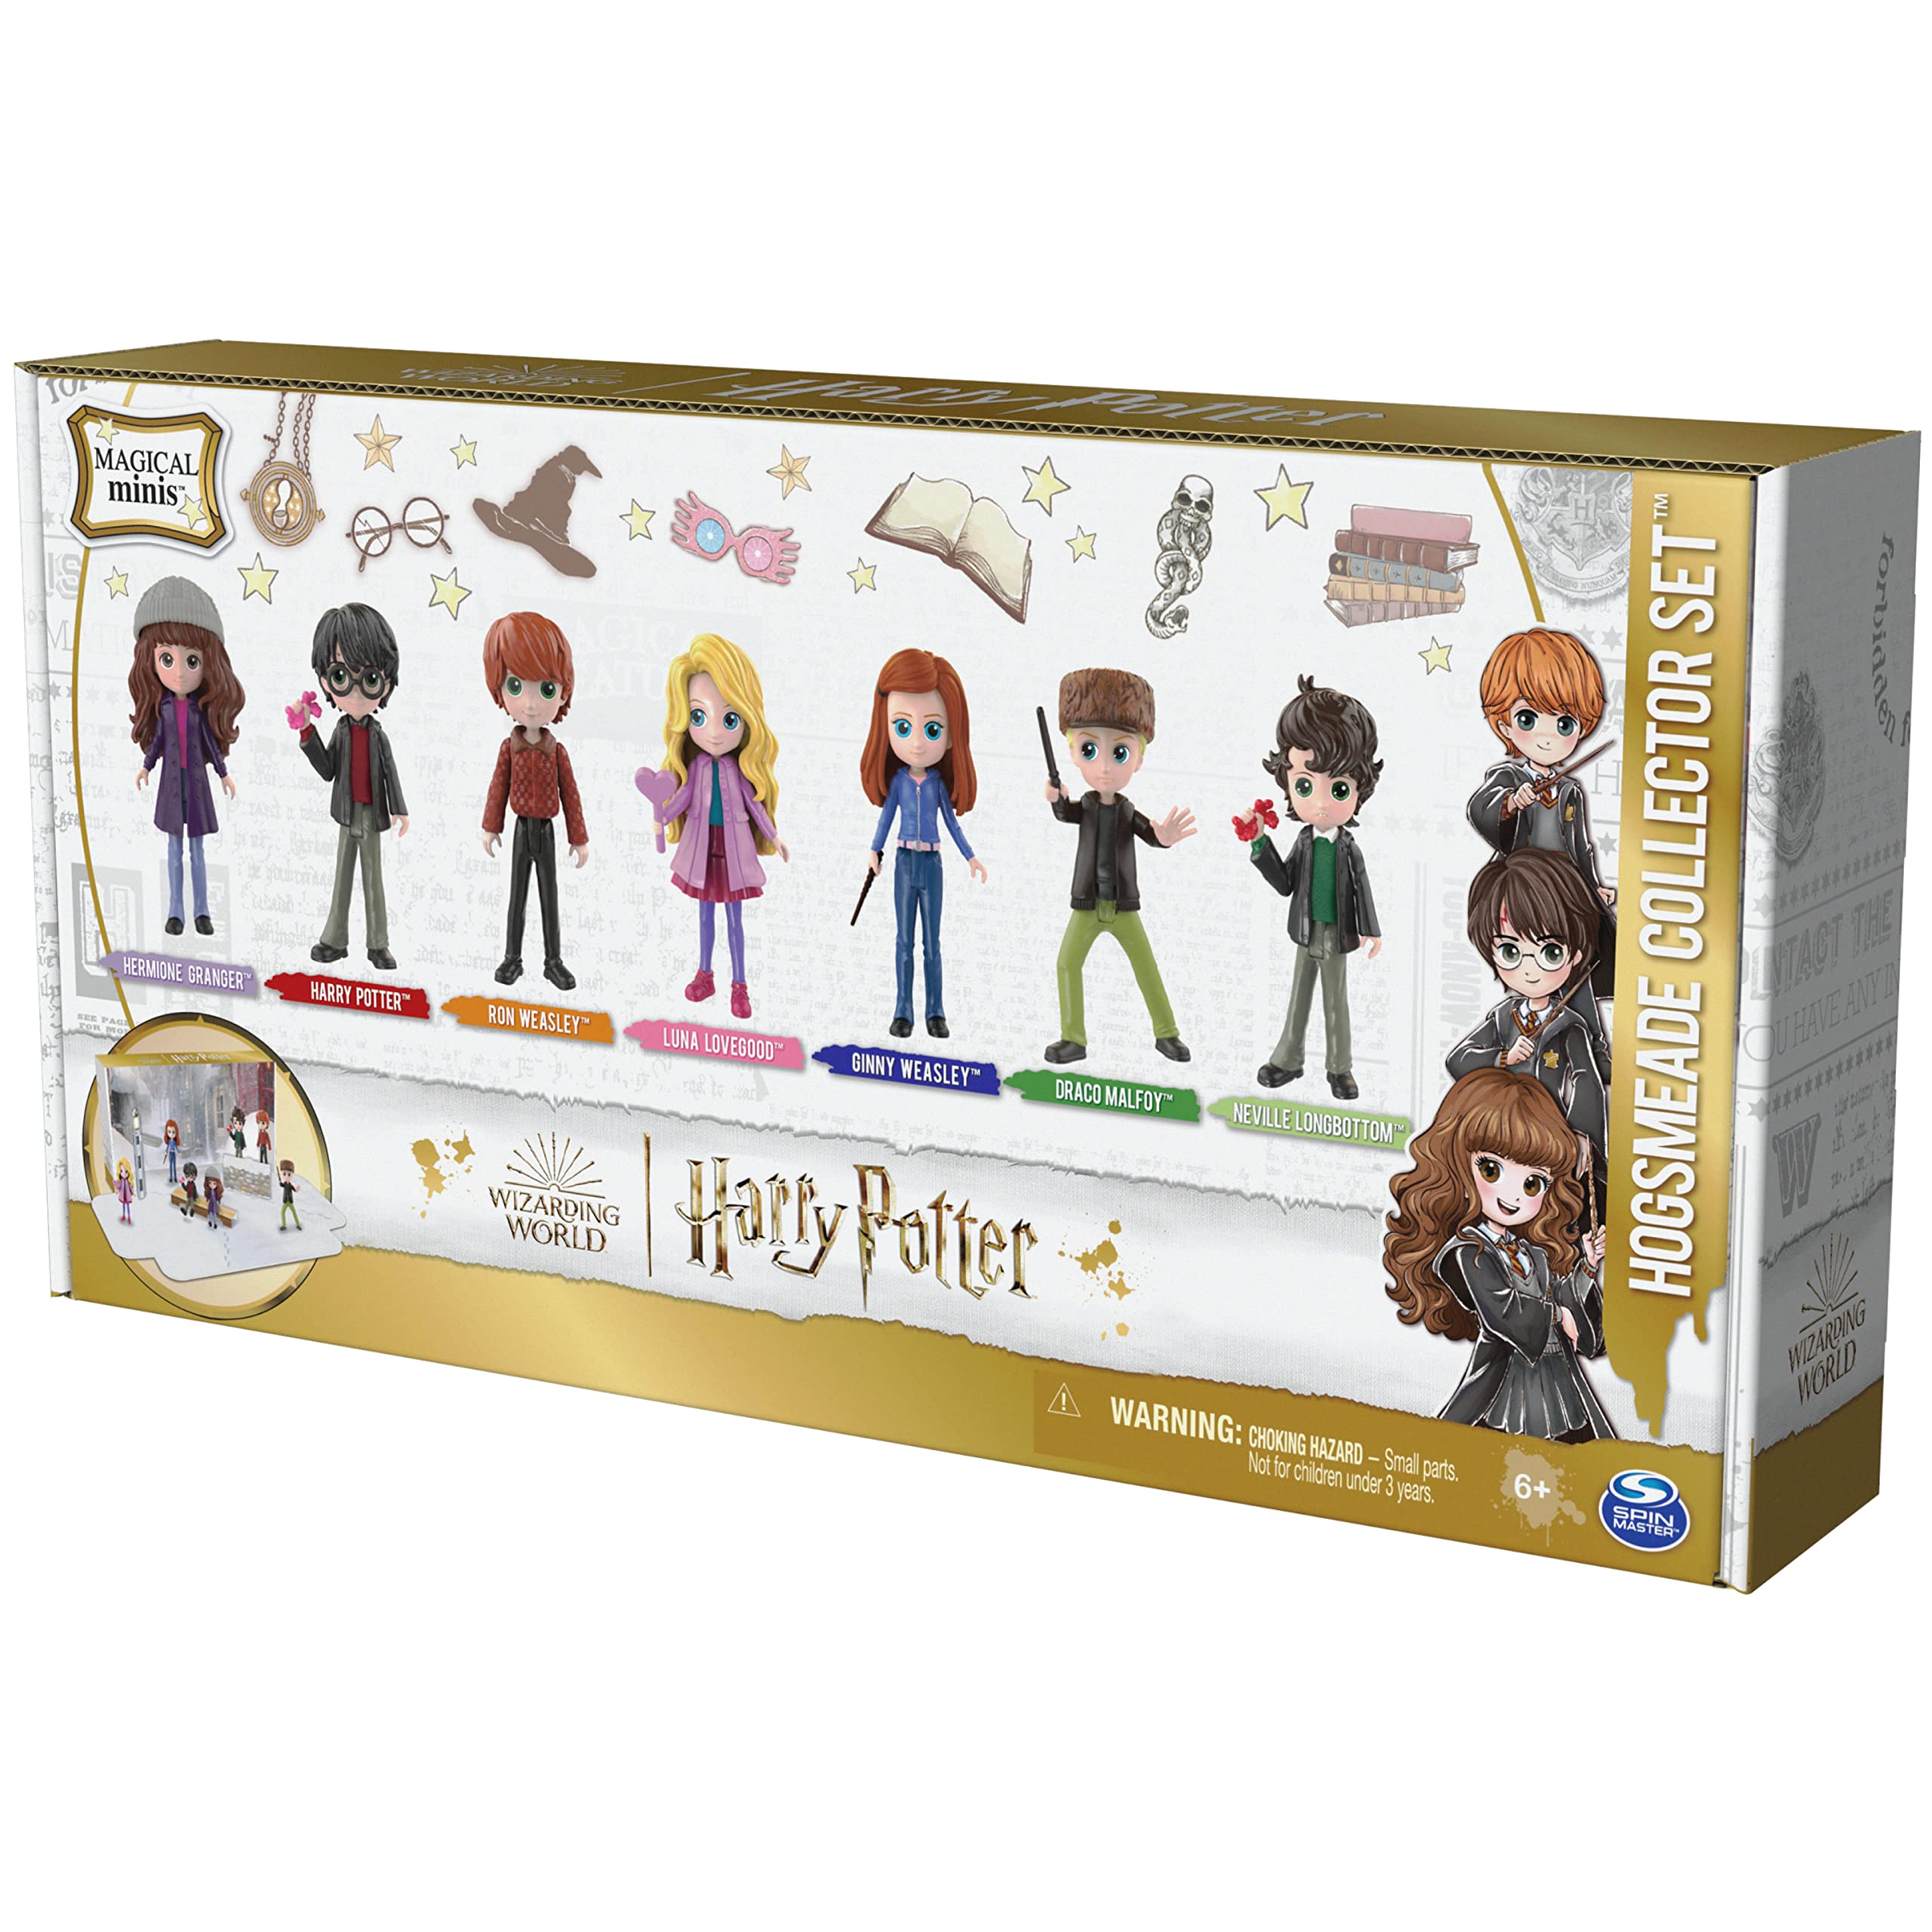 Wizarding World Harry Potter, Magical Minis Hogsmeade Collector Set with 7 Figures, Kids Toys for Girls and Boys Ages 6 and up